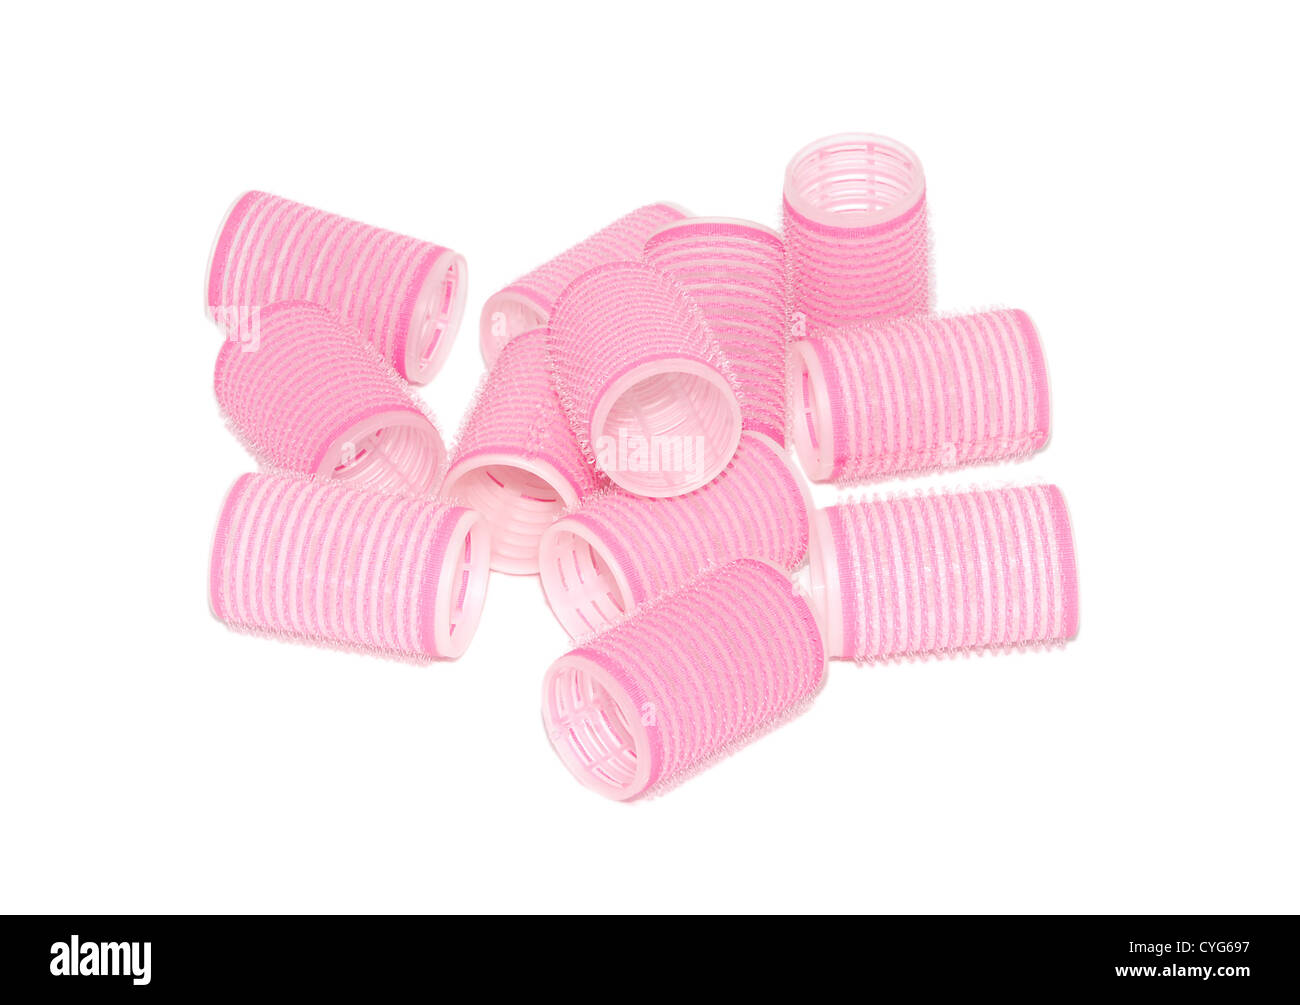 Twelve pink velcro rollers in a jumbled pile, isolated on a white background Stock Photo